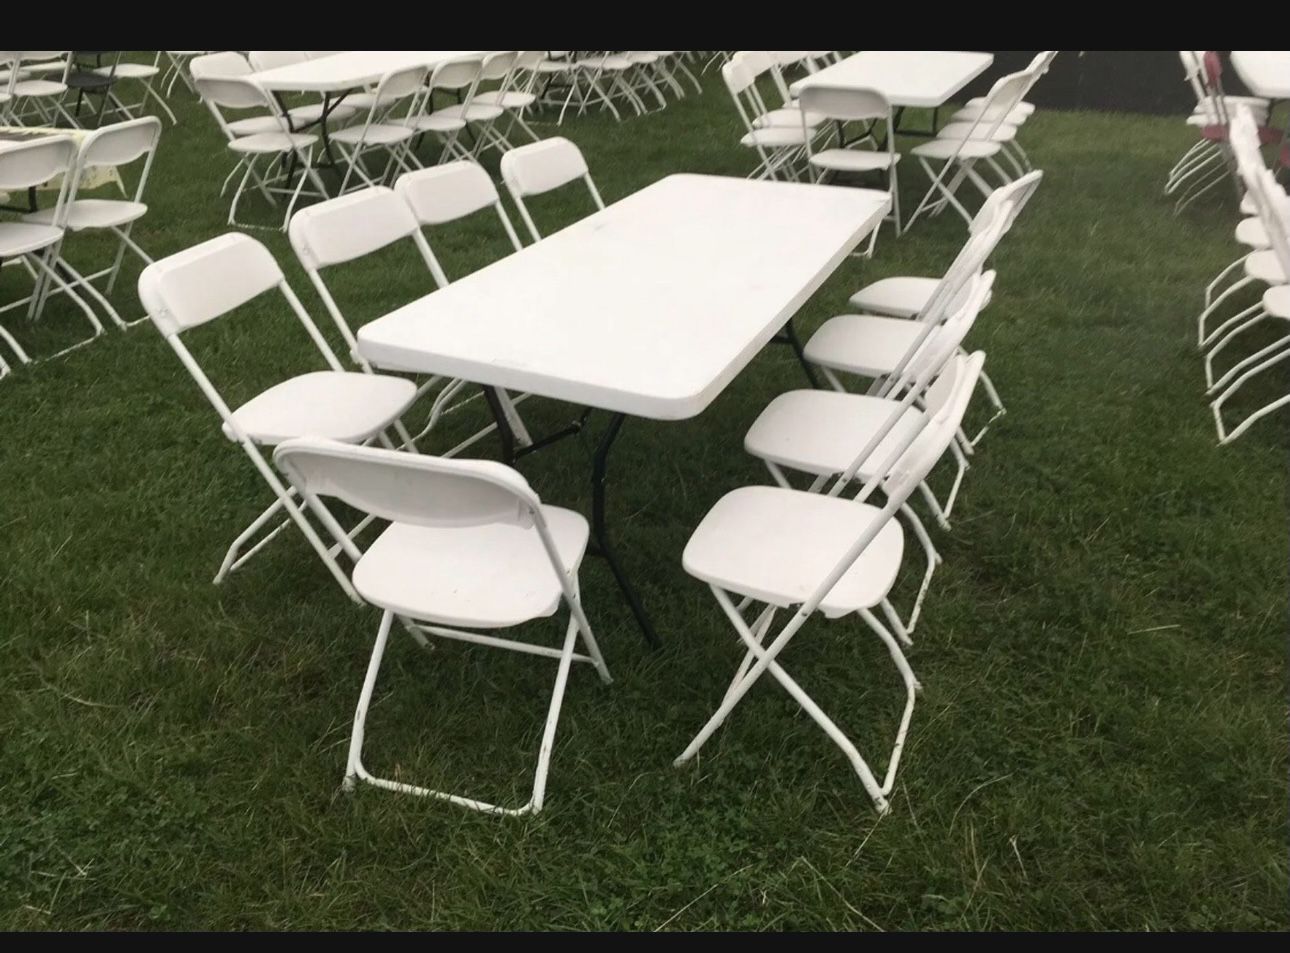 FOLDABLE CHAIRS & TABLES CANOPIES 